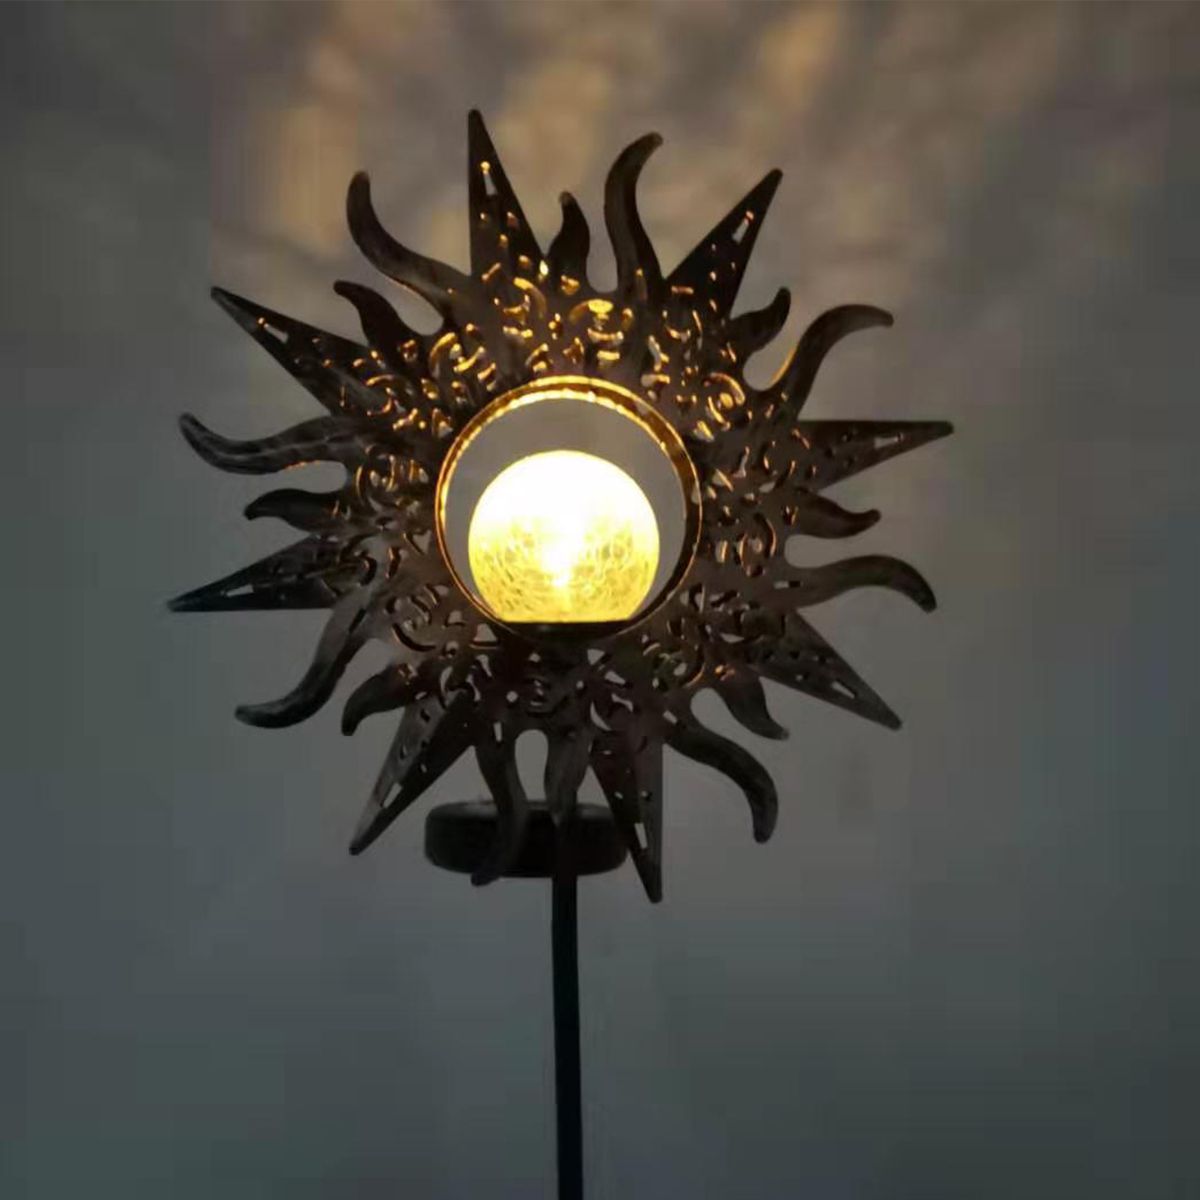 Solar-Powered-LED-Stake-Lawn-Light-Sunflower-Waterproof-Patio-Outdoor-Garden-Path-Lamp-1707064